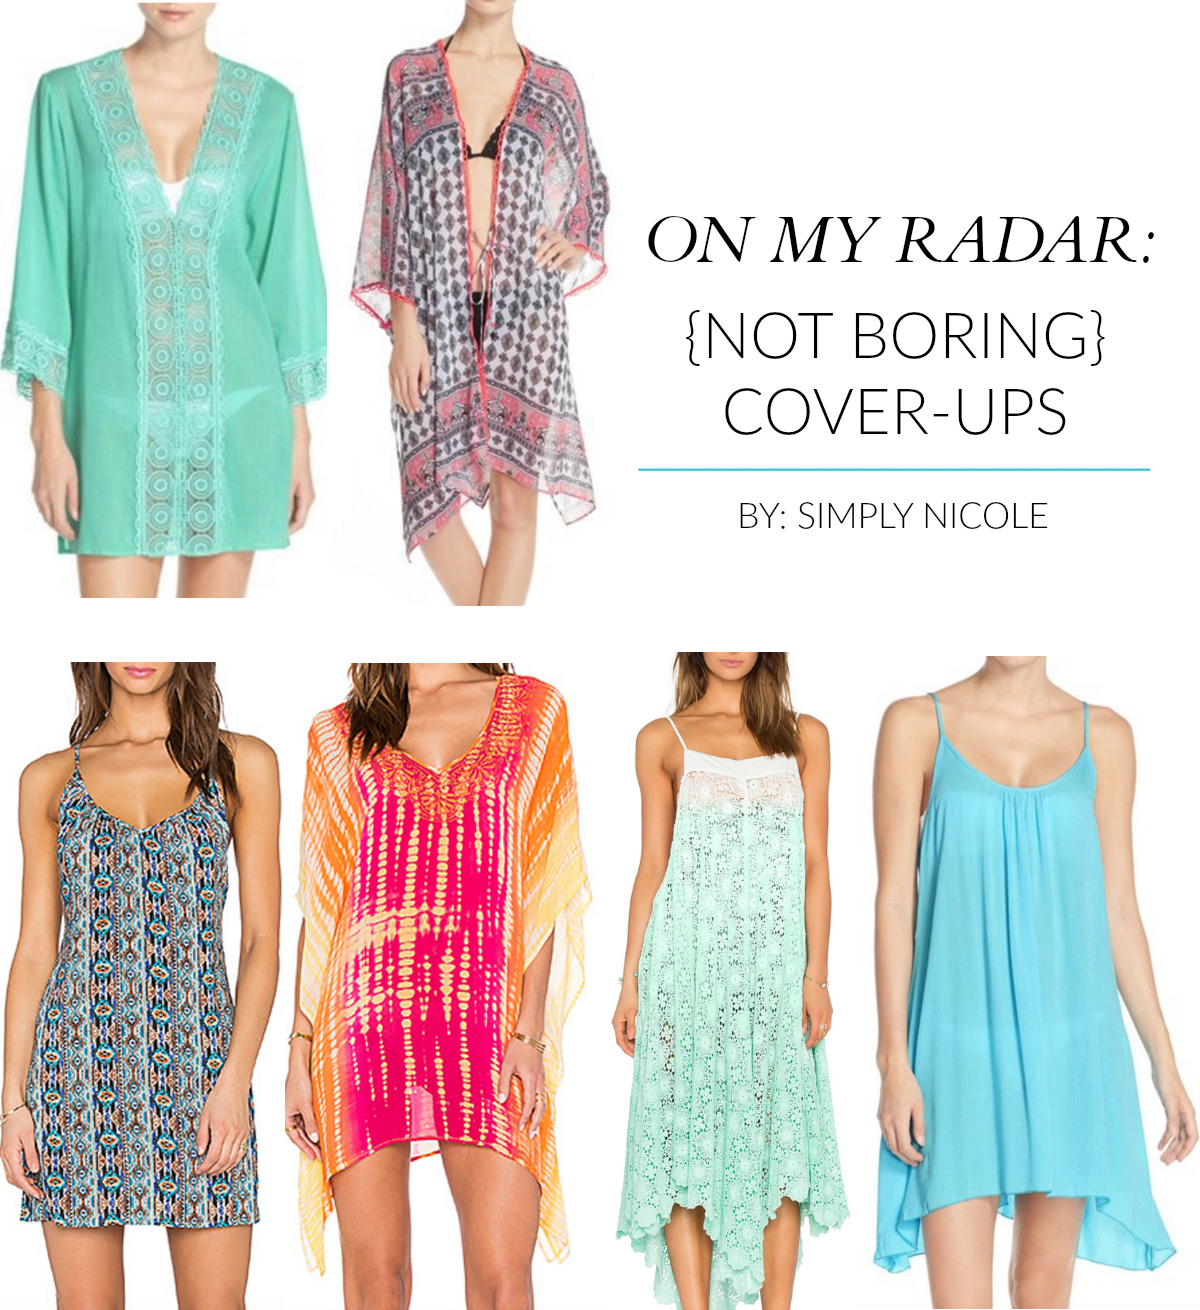 not boring cover ups